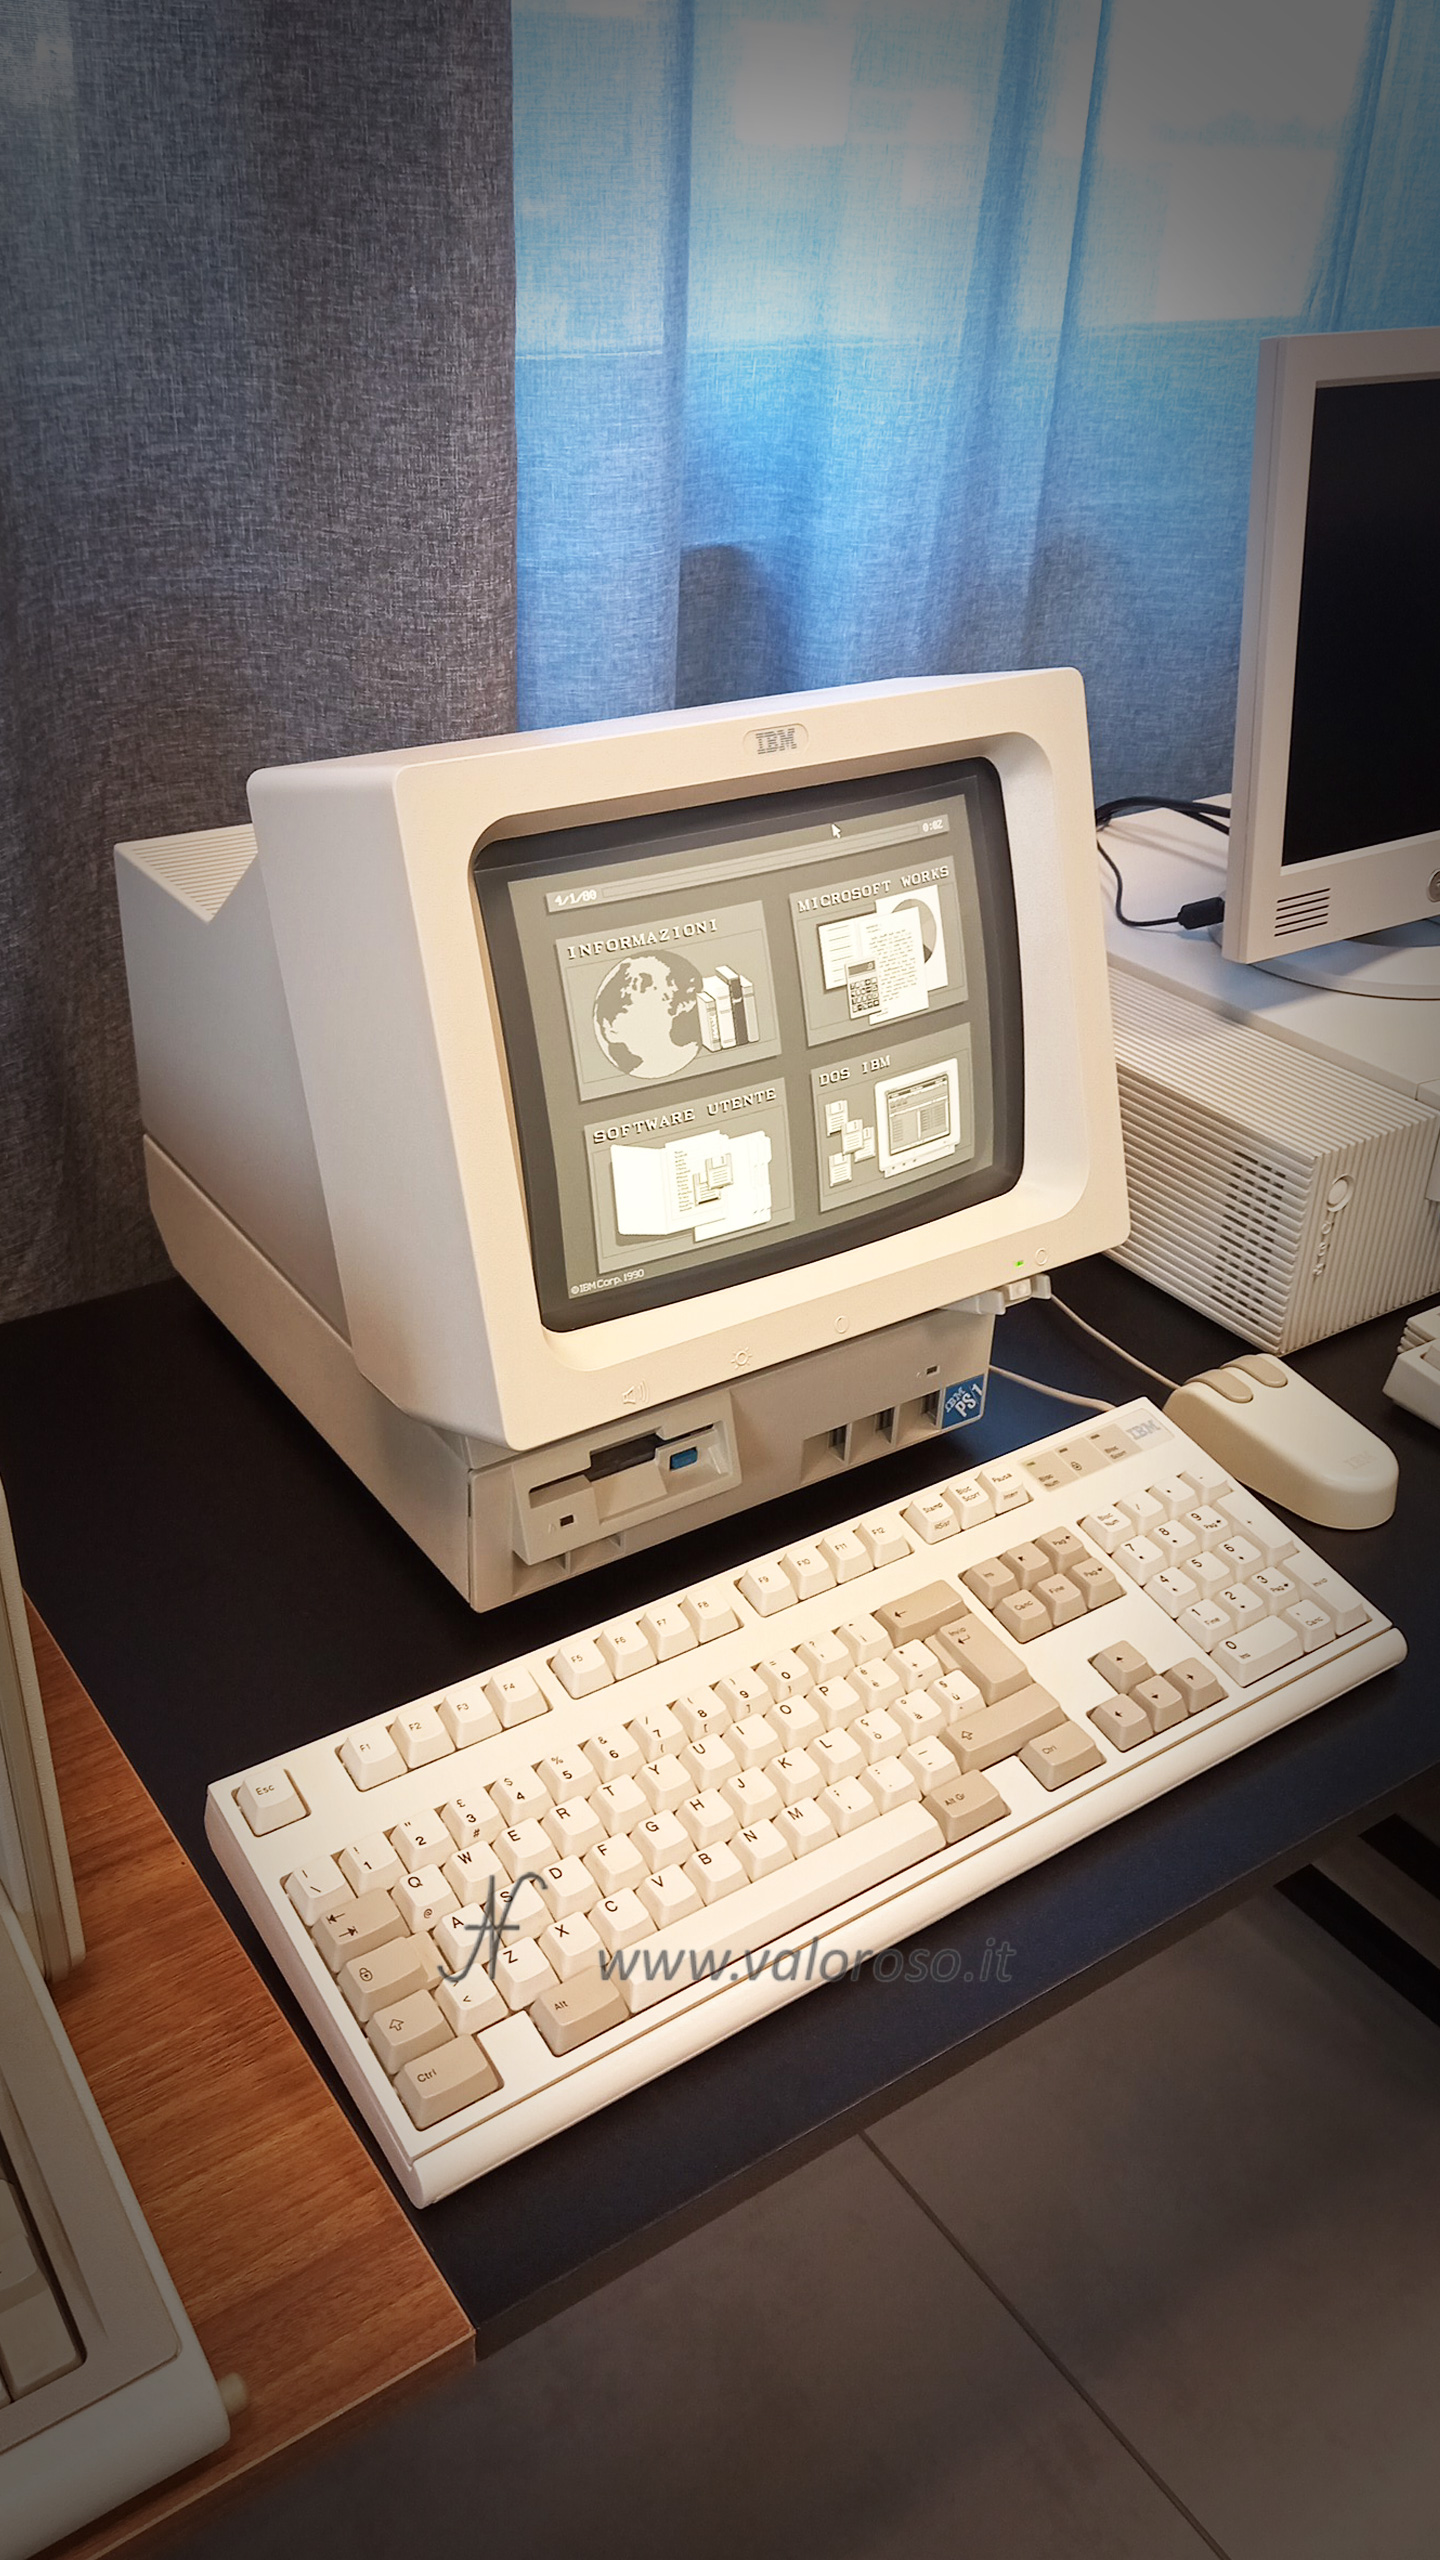 IBM PS/1, monitor CRT in bianco e nero, PS/2 mouse, keyboard IBM modem M2 buckling springs